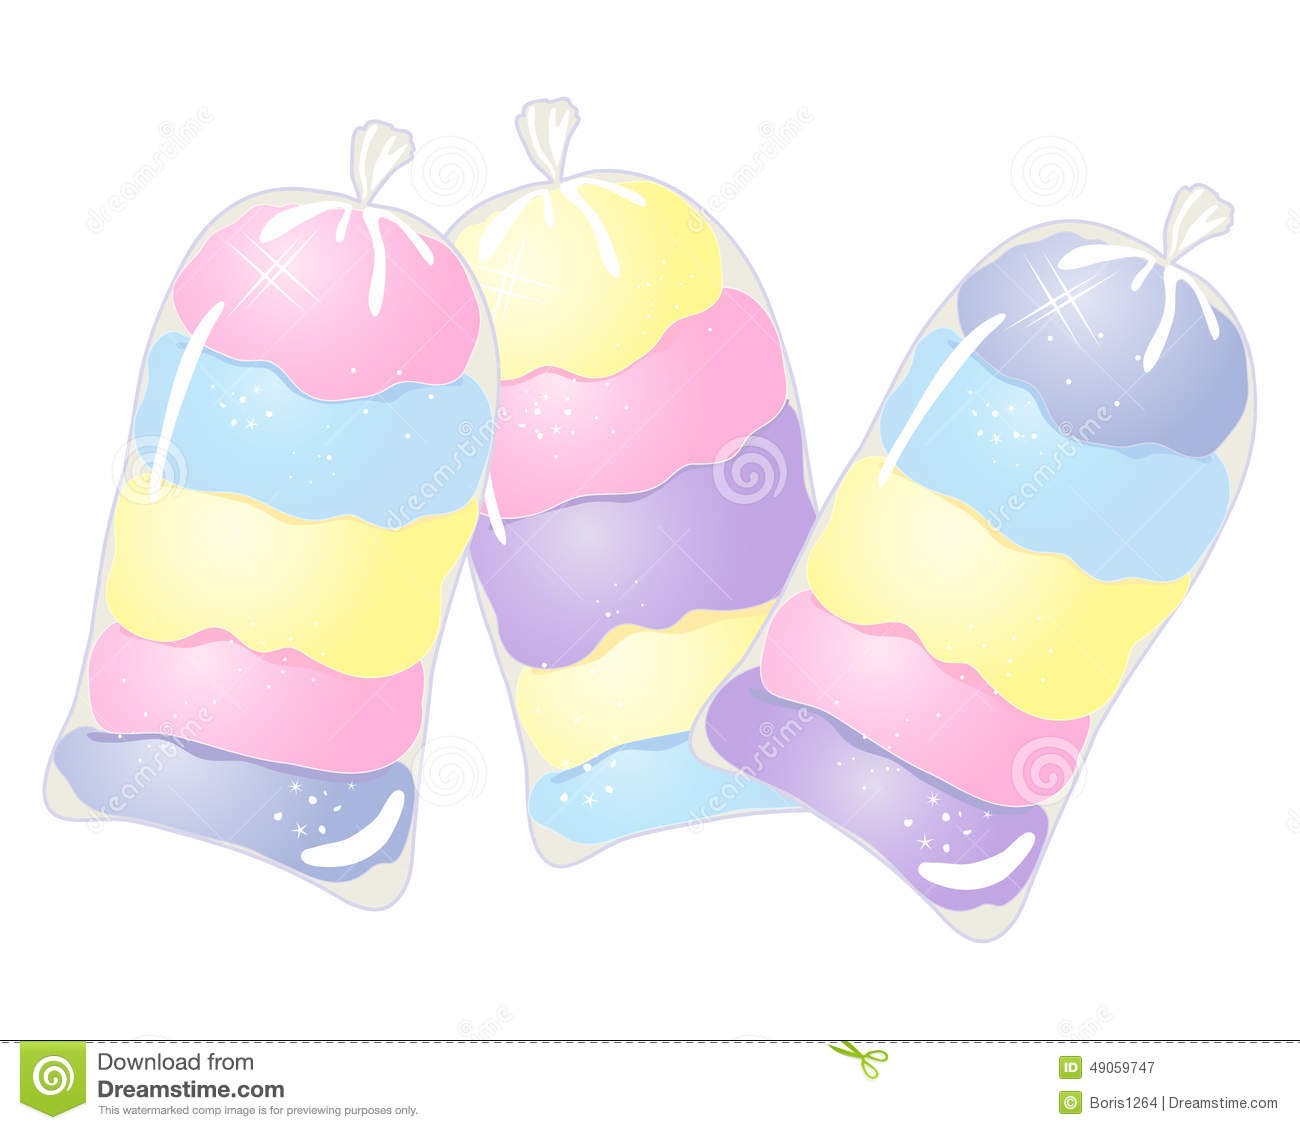 An Illustration Of Three Clear Bags Of Colorful Cotton Candy In Pink